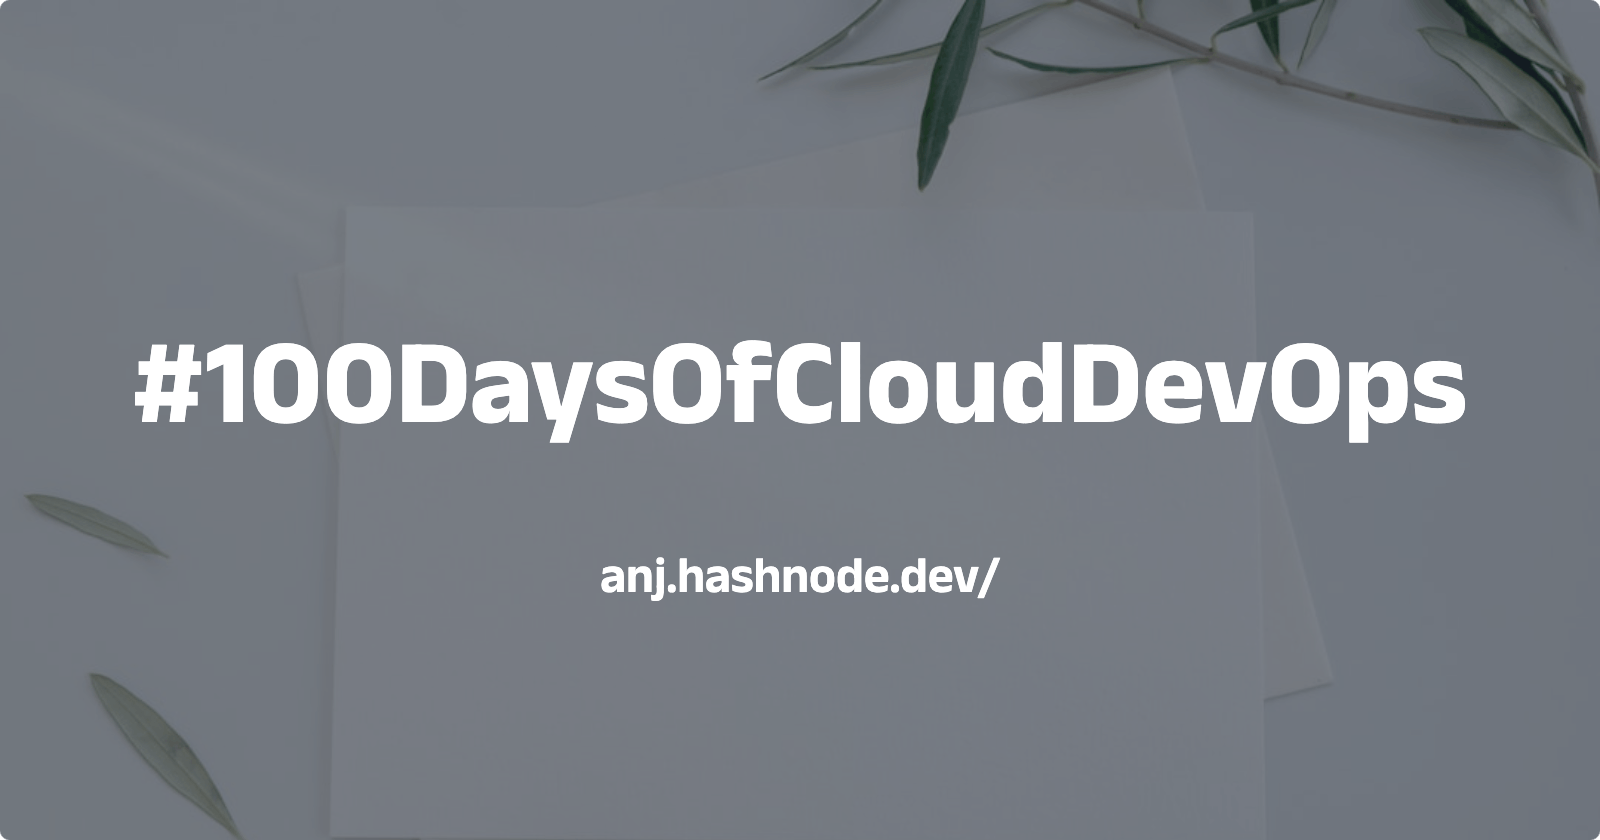 #100DaysOfCloudDevOps Challenge — Day 01 — An Introduction to Cloud Computing & DevOps